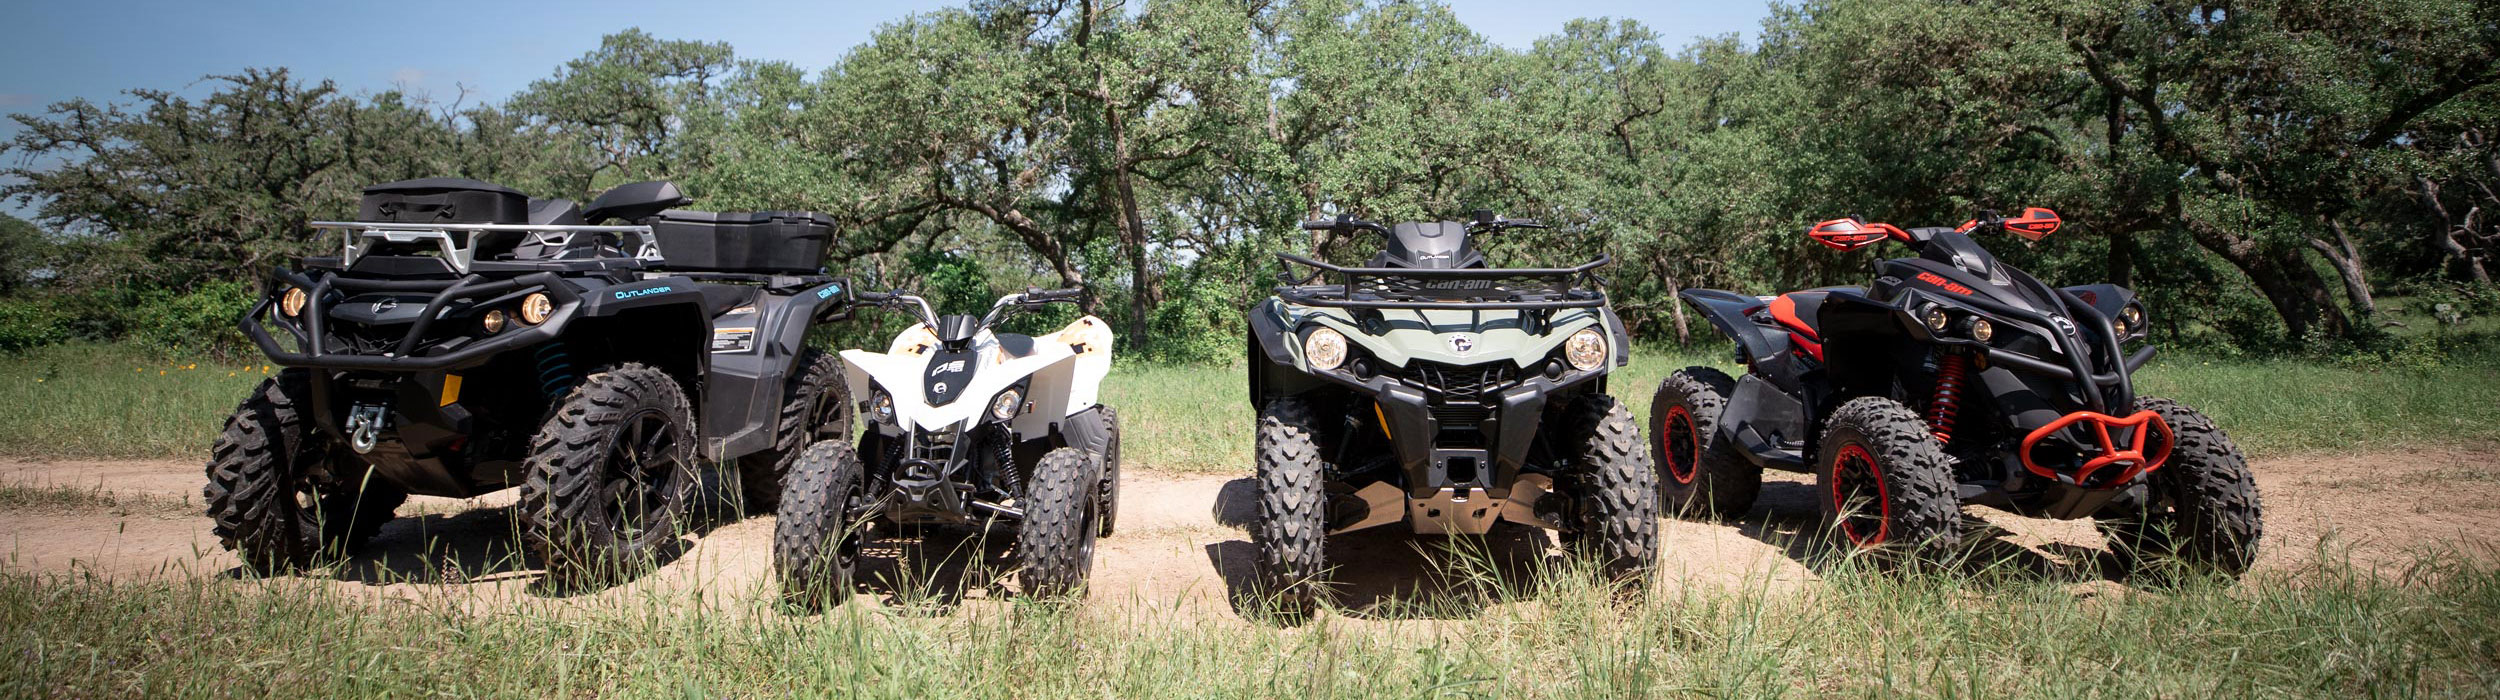 Four different models of Can-Am ATVs